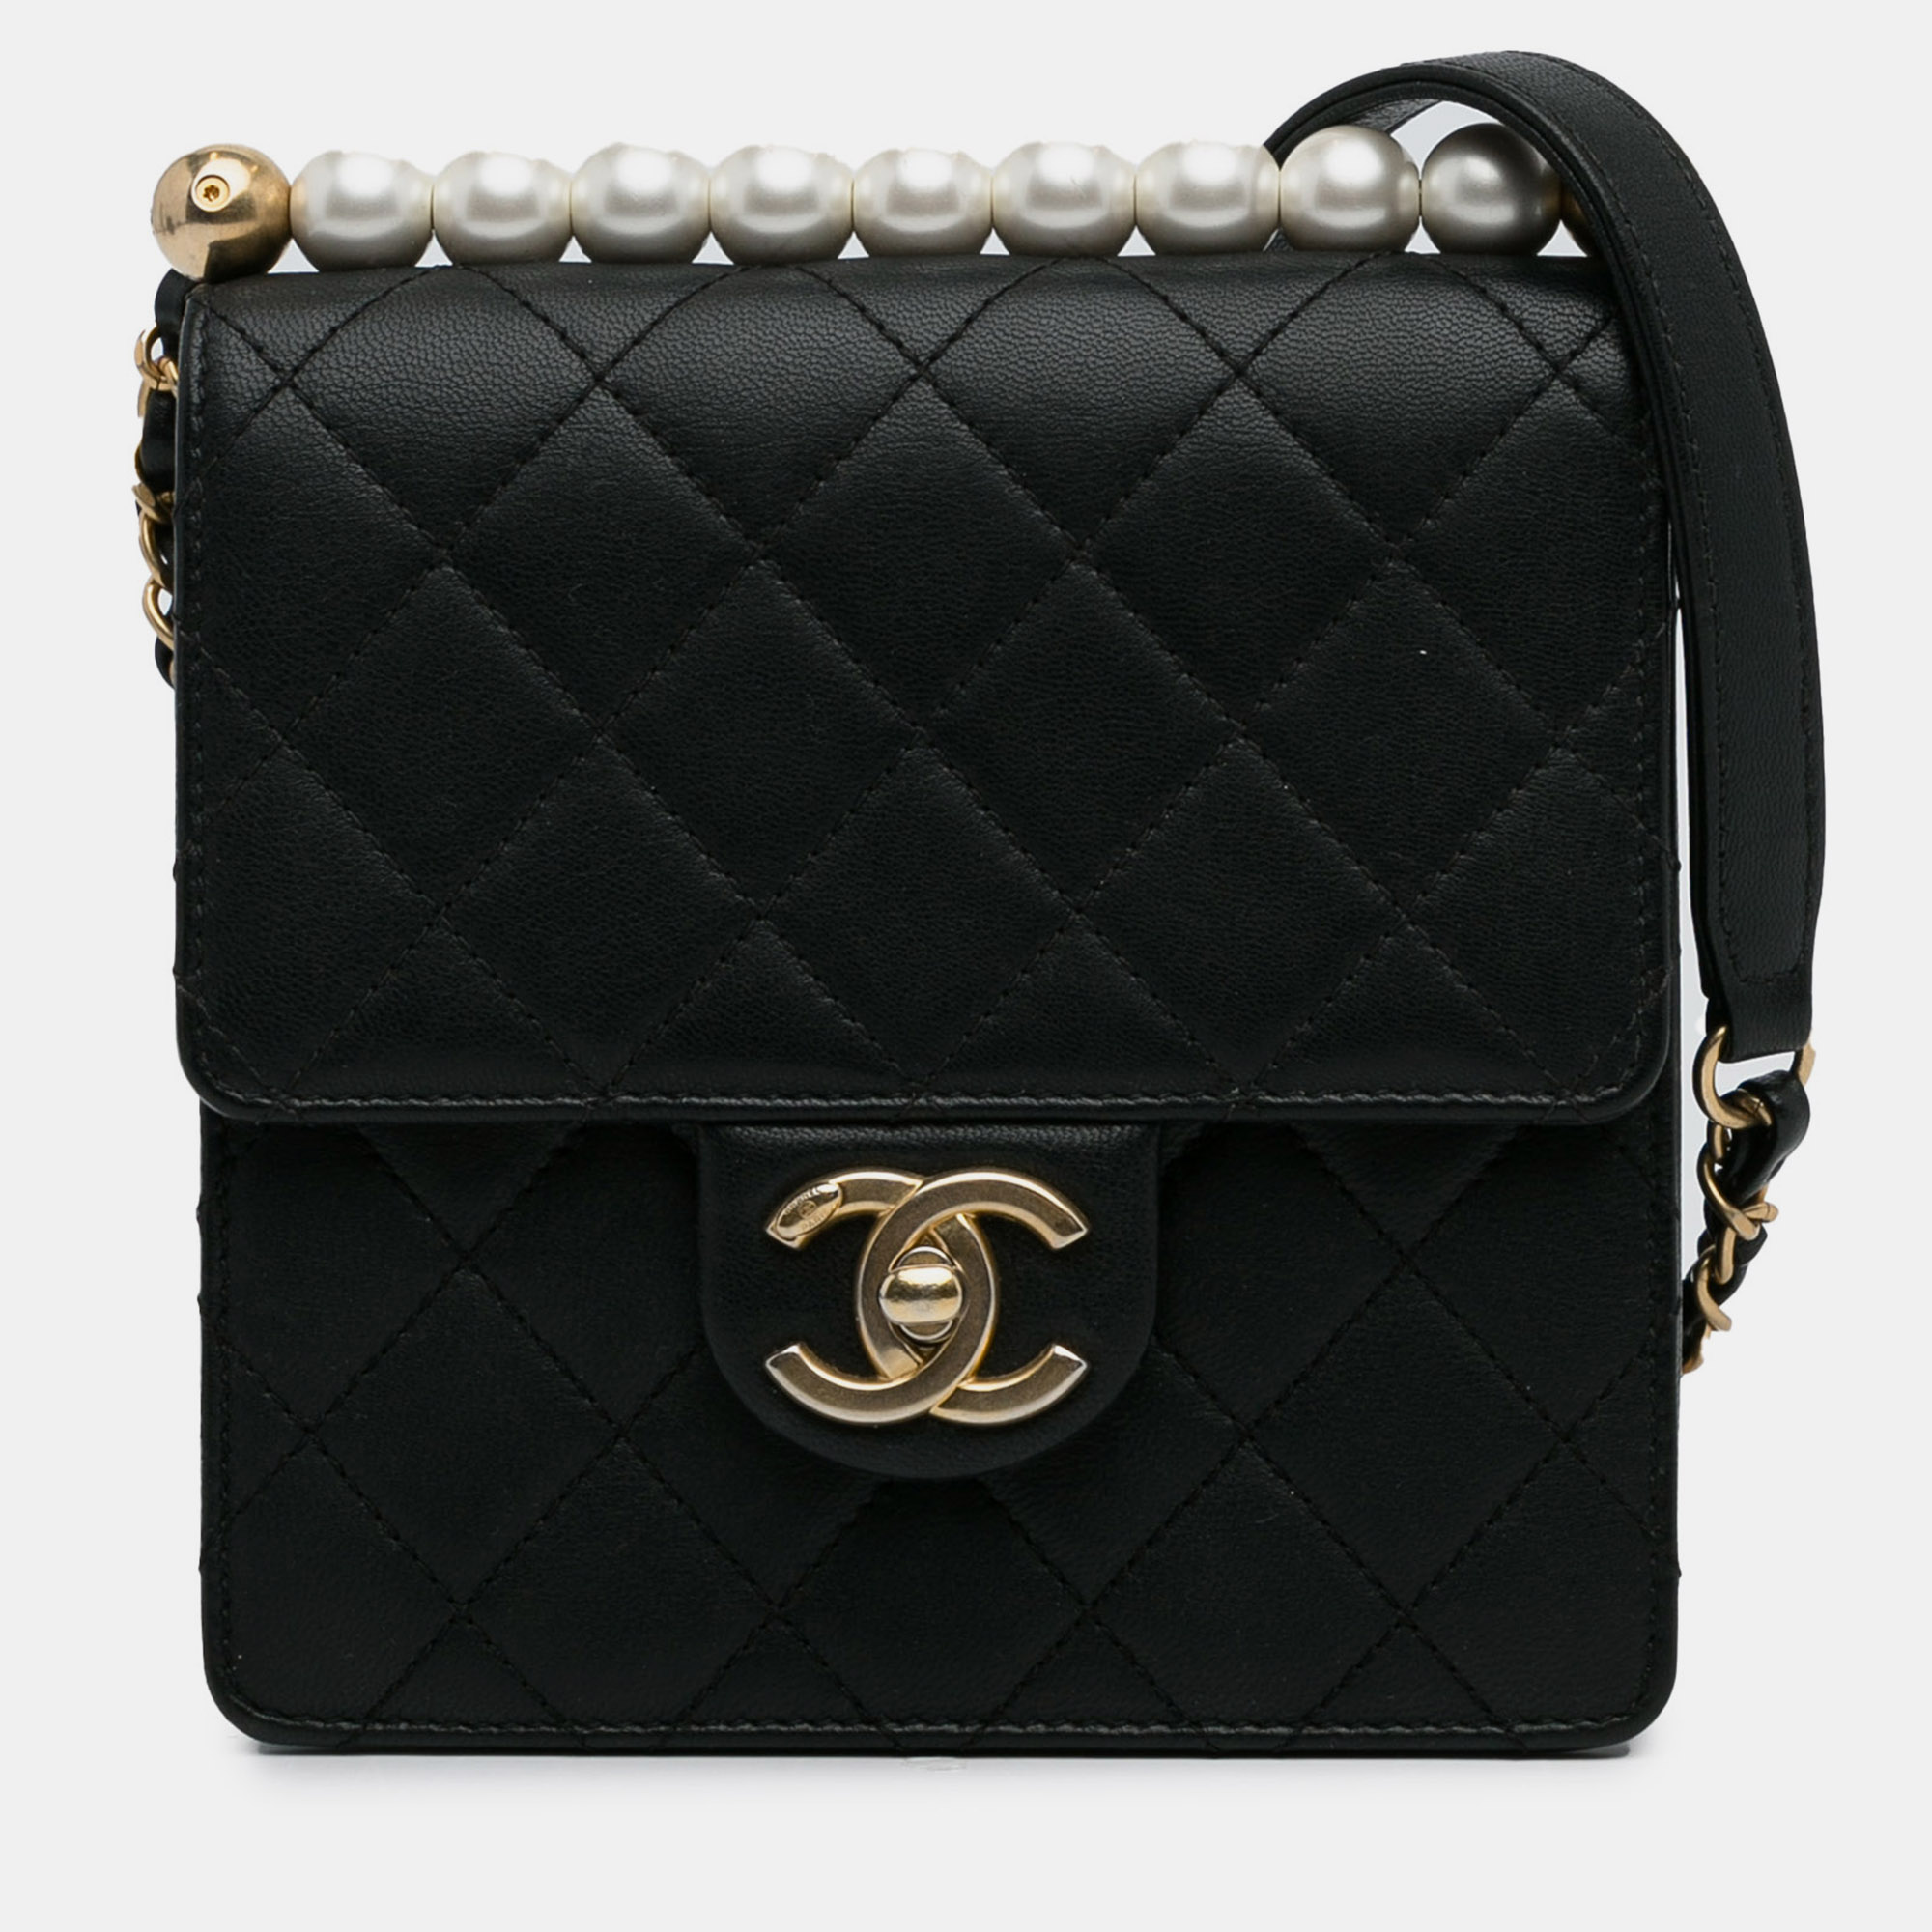 Chanel small chic pearls flap